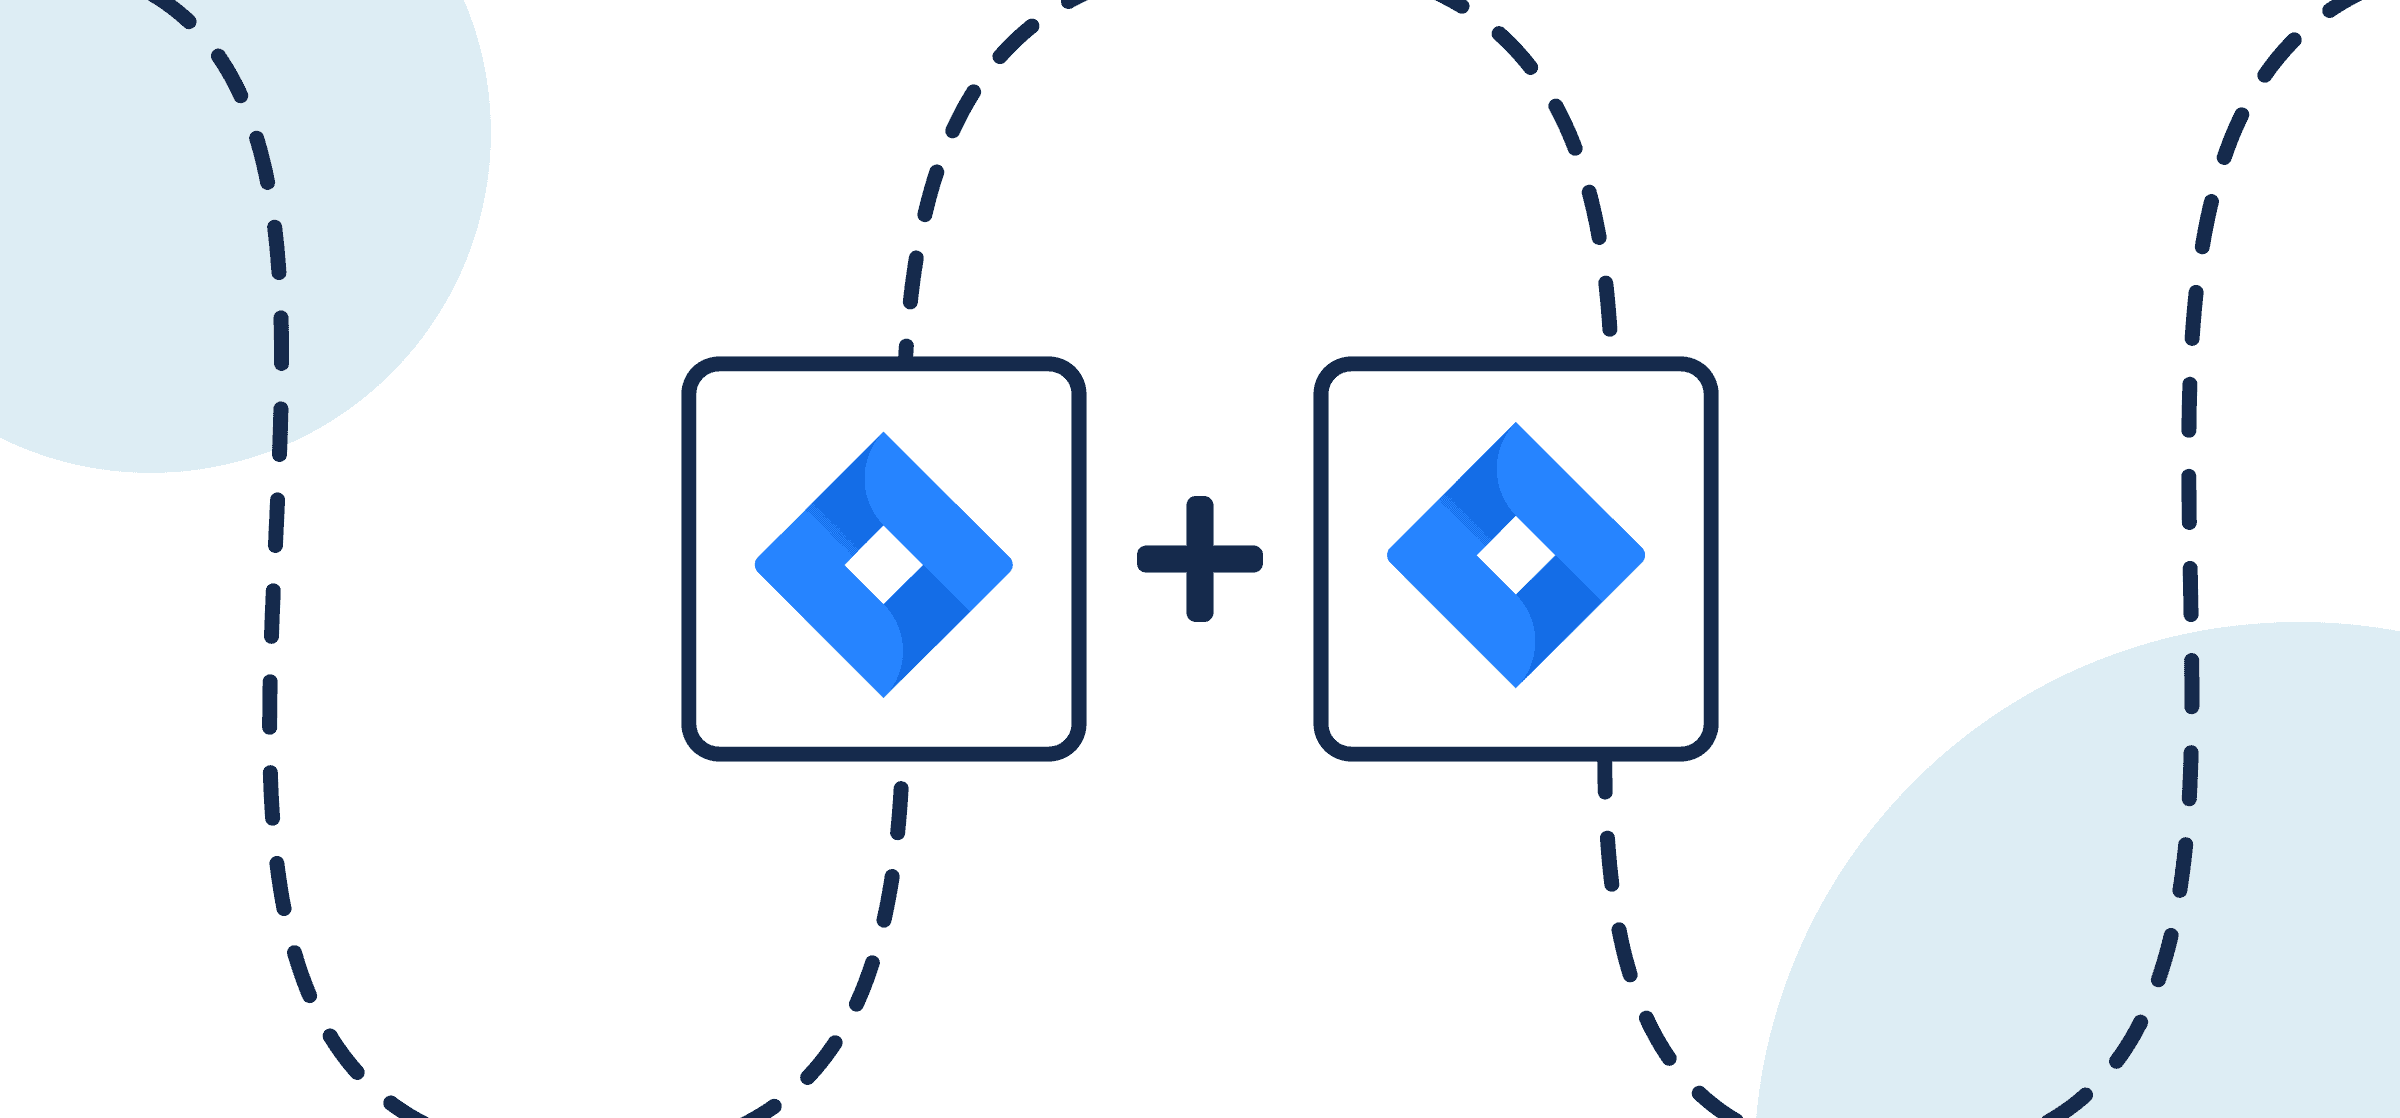 Featured image illustrating a step-by-step guide on syncing one Jira account to another through Unito, depicted by the connected Jira logos through circles and dotted lines.